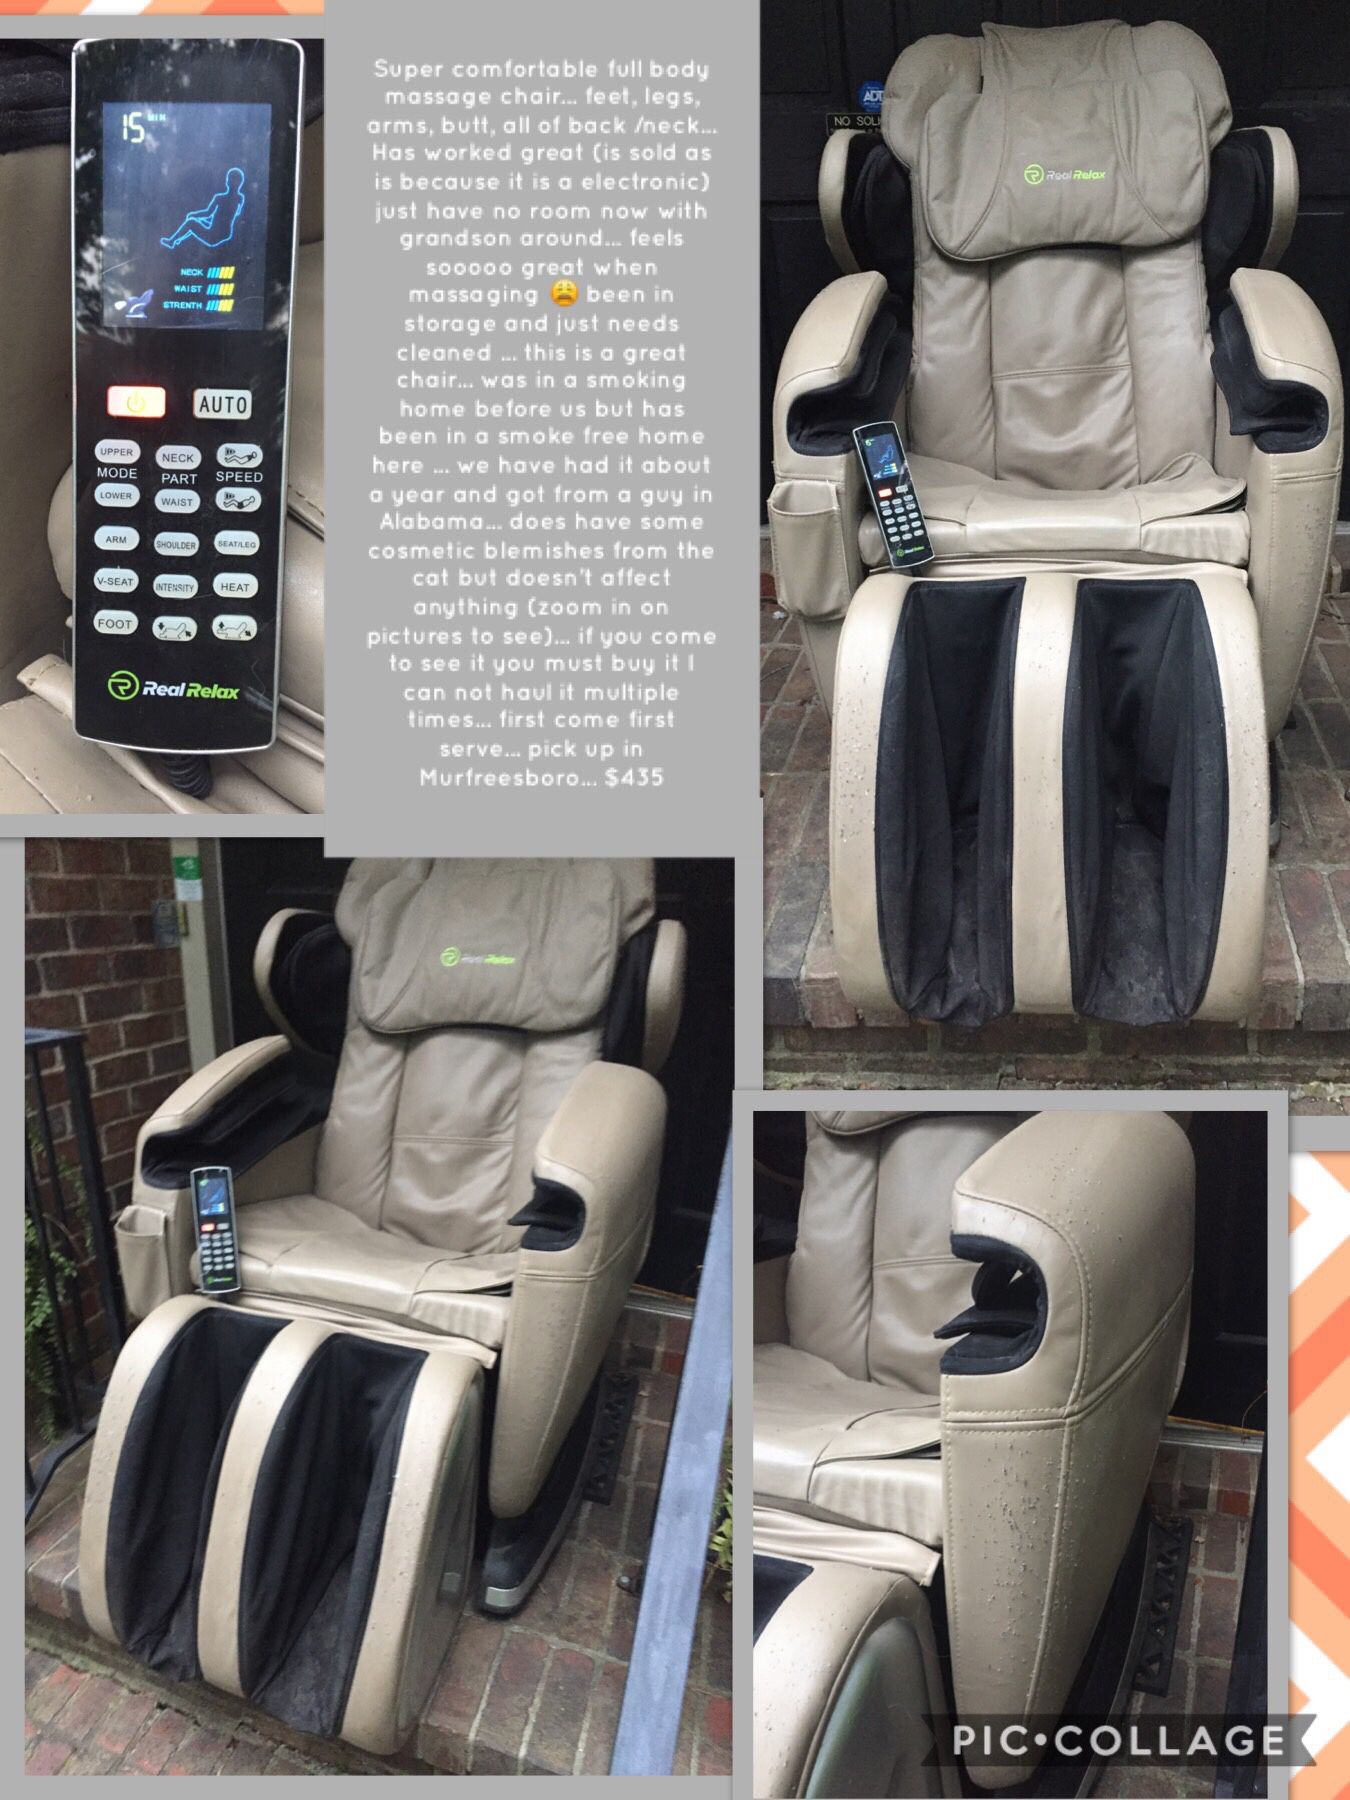 Super comfortable full body massage chair... feet, legs, arms, butt, all of back /neck... Has worked great (is sold as is because it is a electronic)